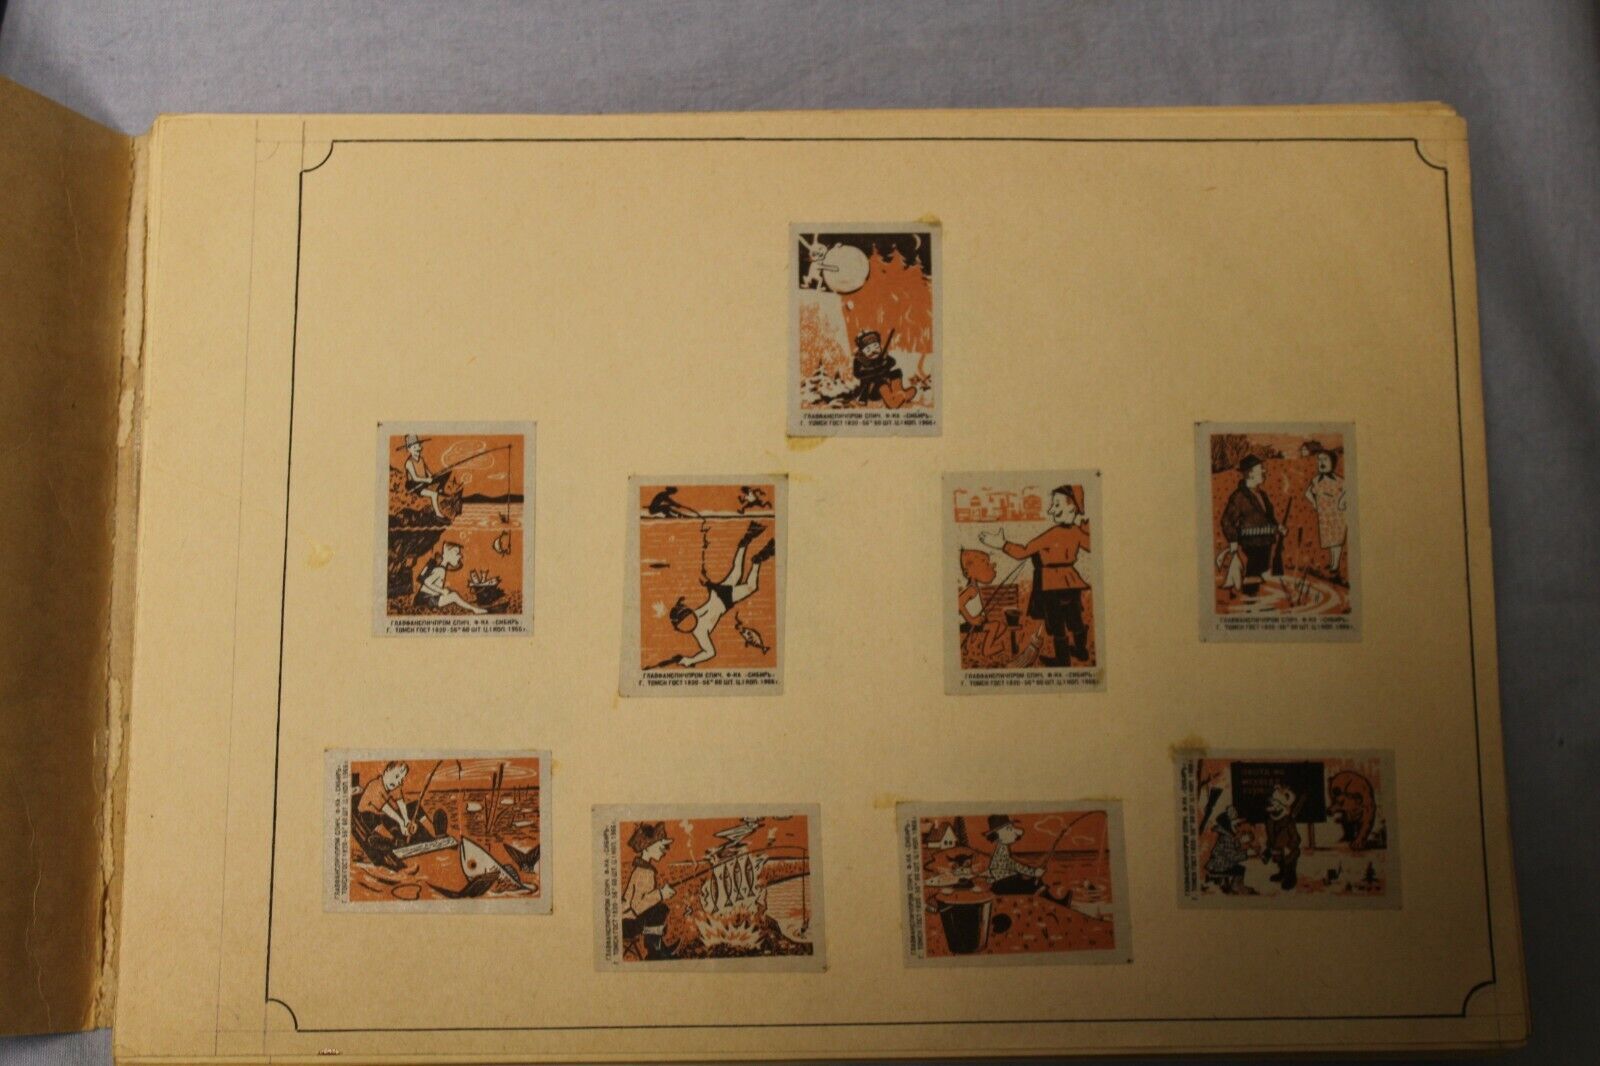 11240.Collection of Soviet USSR Match Lables 1950-60. About 300 sheets, 2000 lables